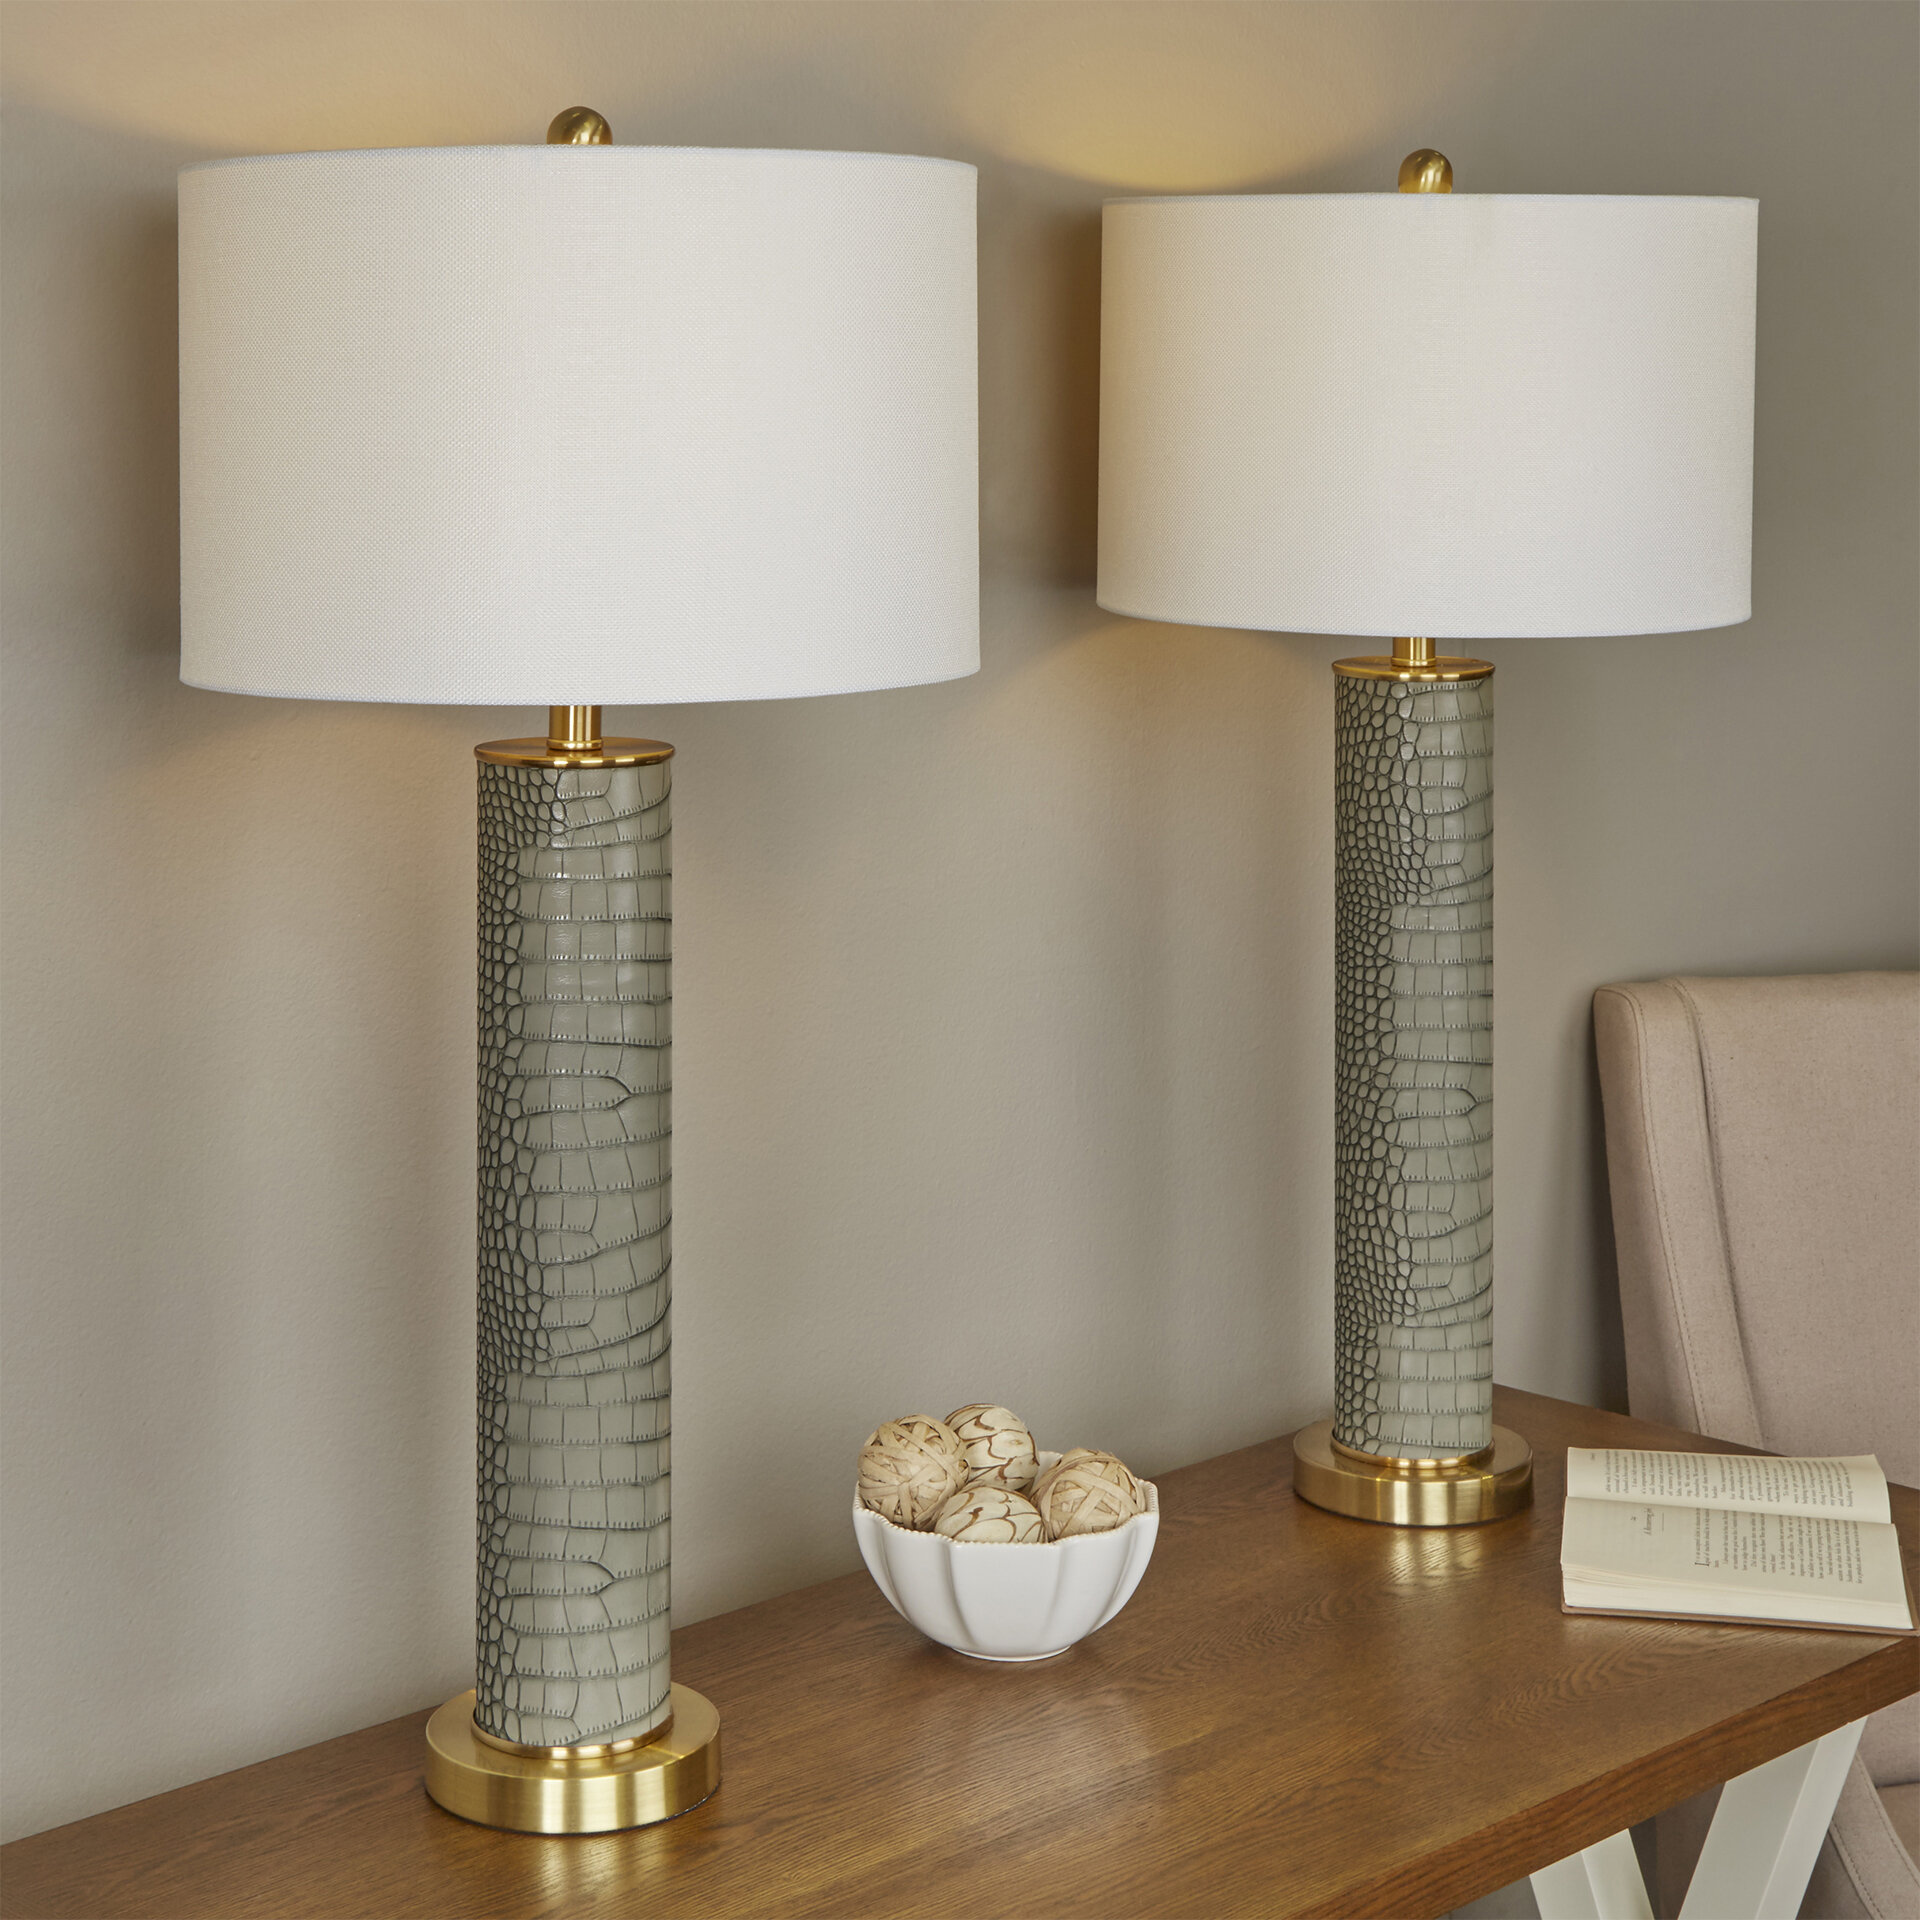 Extra Tall Table Lamps You'll Love in 